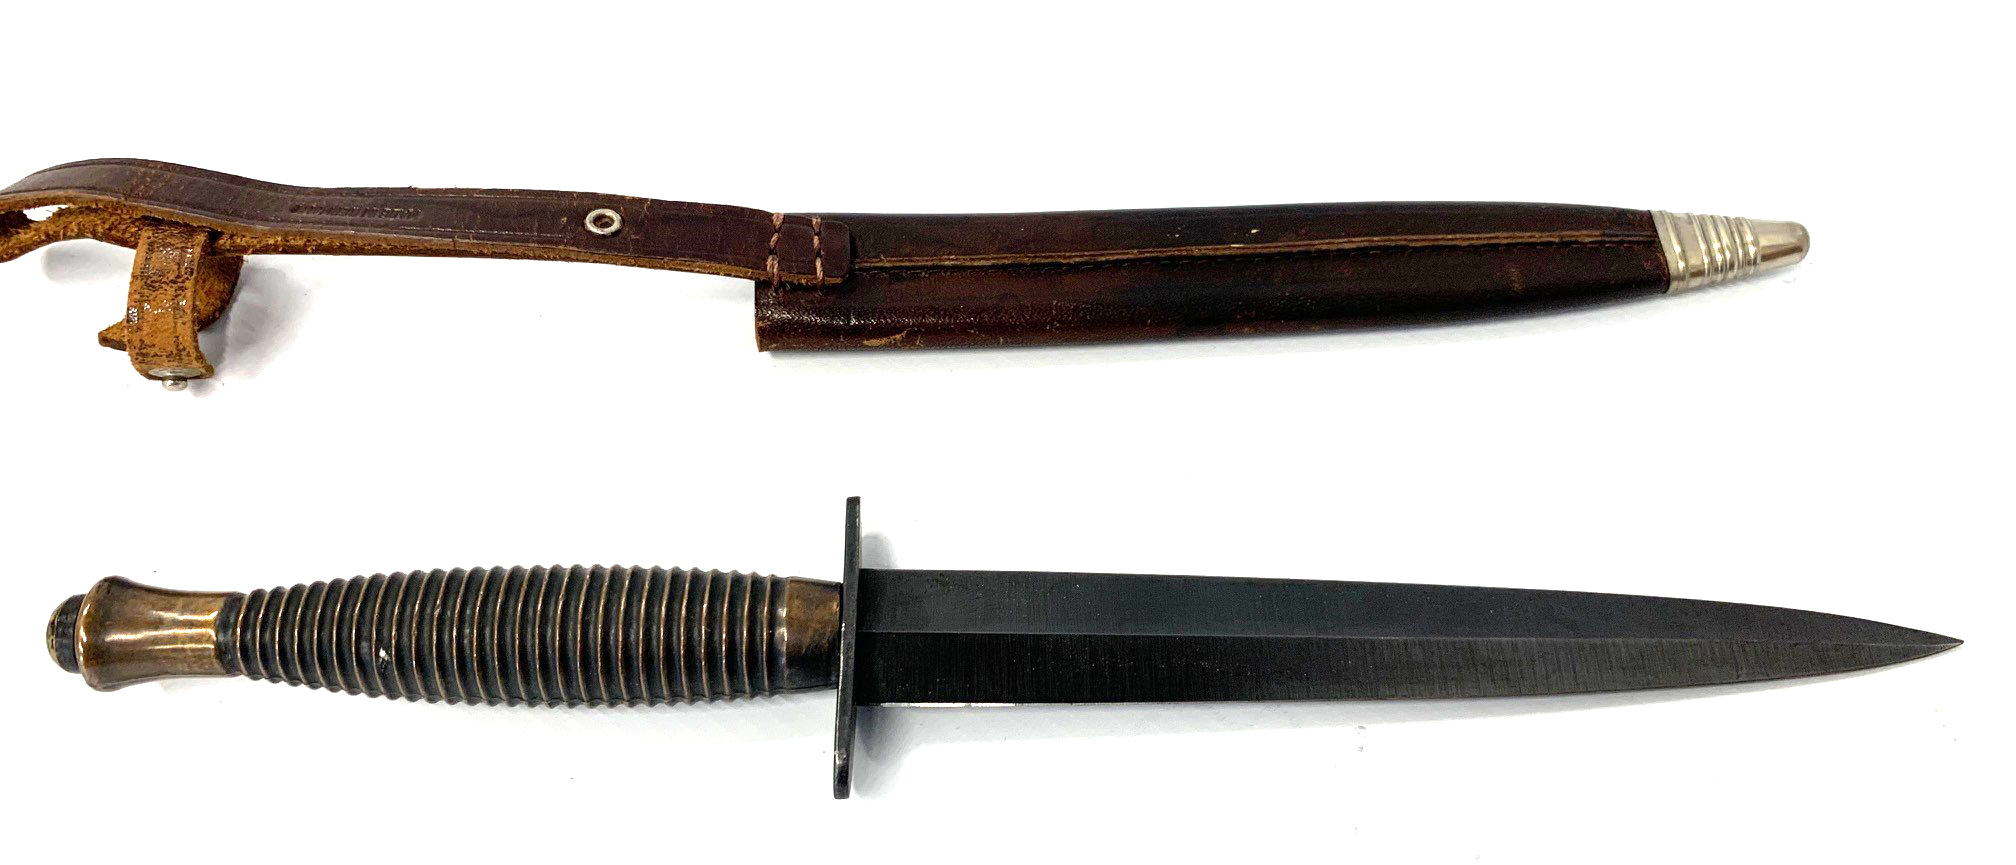 FAIRBAIRN SYKES DAGGER BY IMPERIAL GUDEDGE CUTLERY COMPANY In original leather sheath. (length of - Image 2 of 5